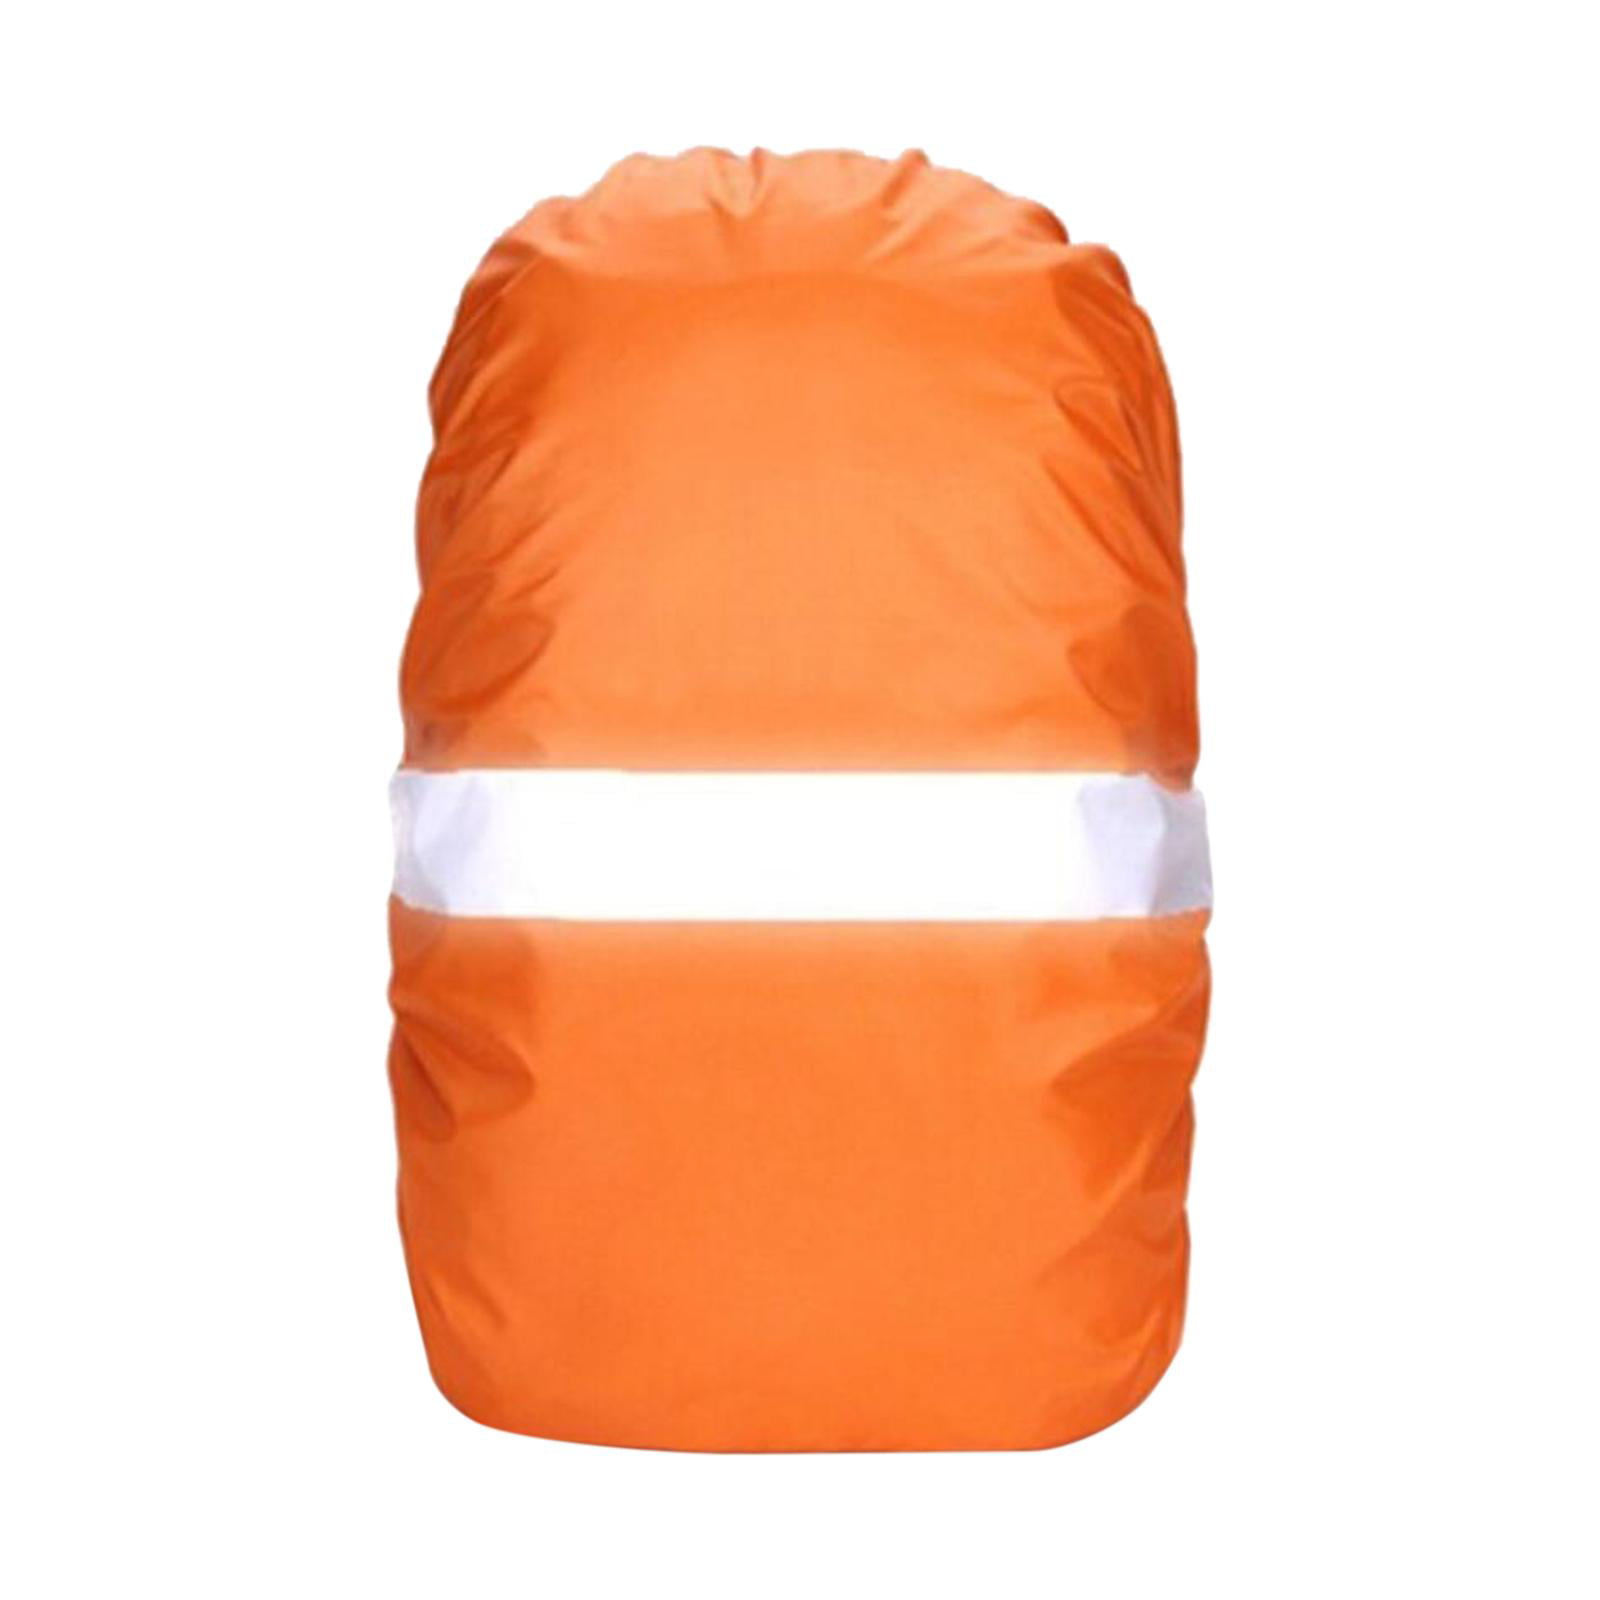 Backpack Cover with Reflective Strip Women Men Waterproof Bag Rain Cover G1A9 